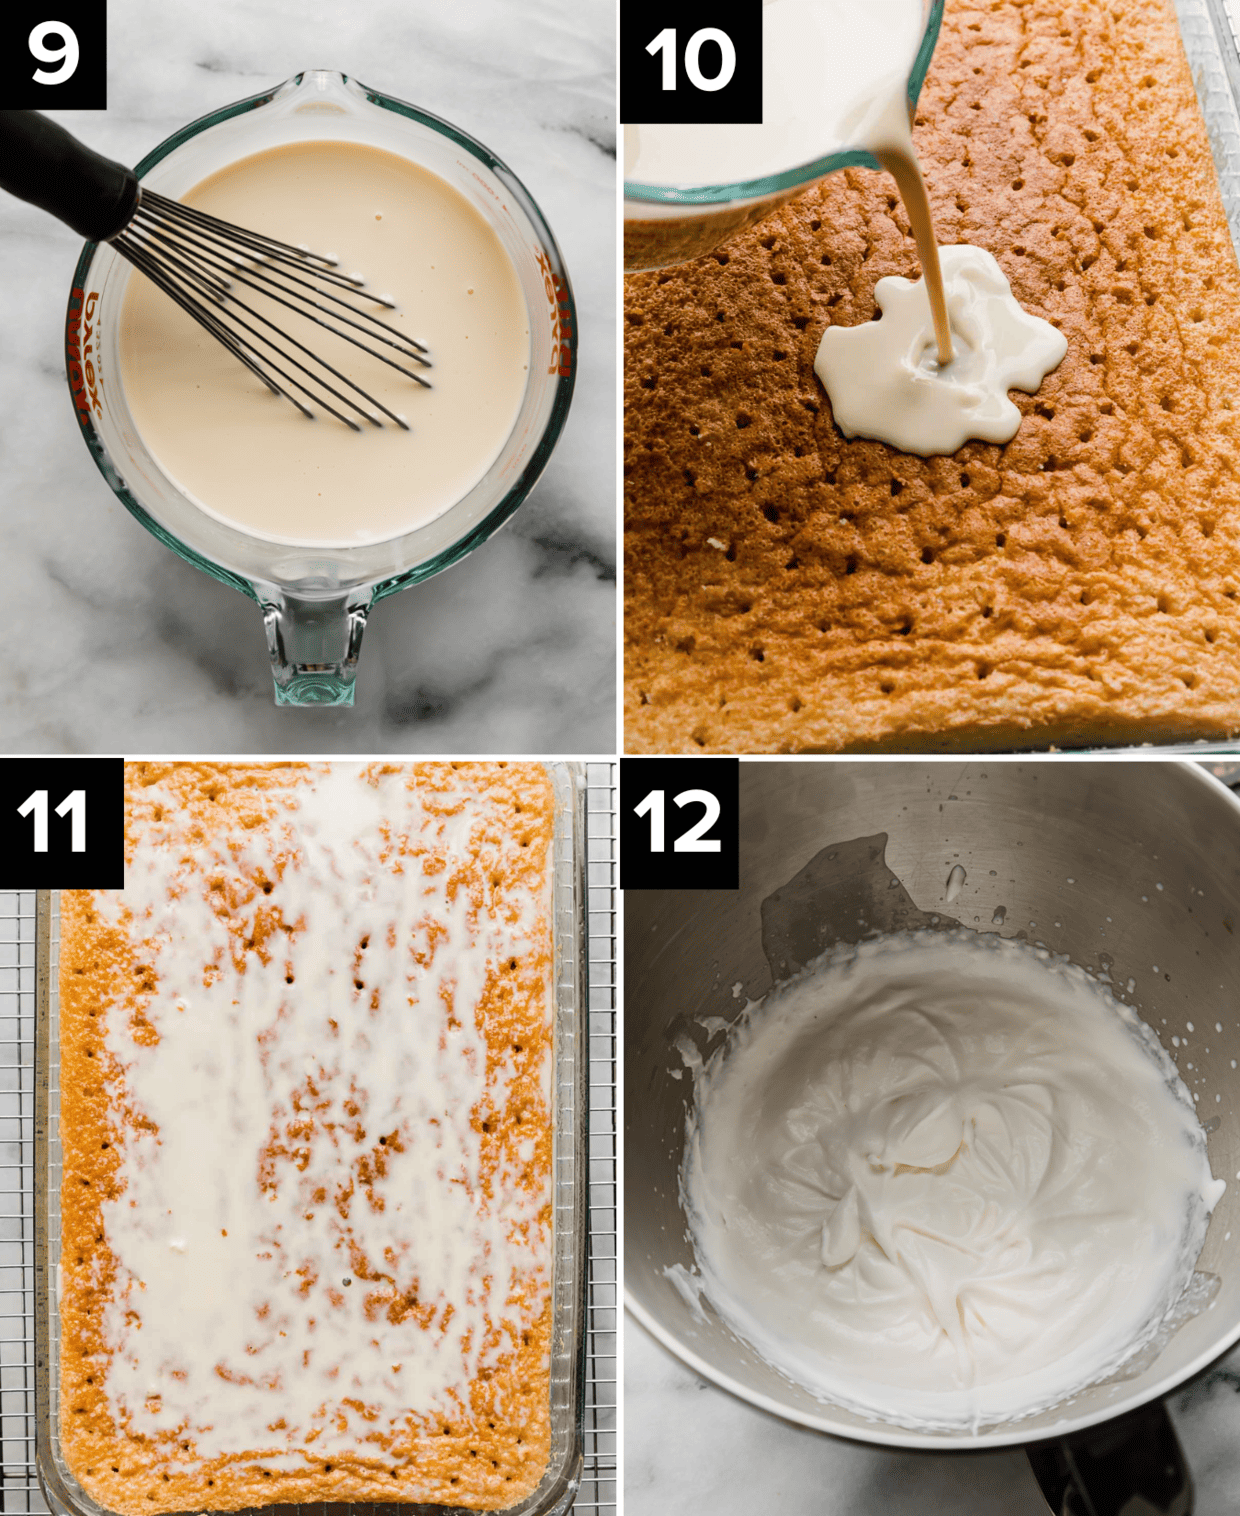 How to make an authentic Mexican tres leches cake, four photos, top left is a three milk mixture in glass cup, top right is a milk mixture being poured over the milk cake, bottom left photo is the cake soaking up the milk mixture, bottom right is whipped cream in a metal bowl.